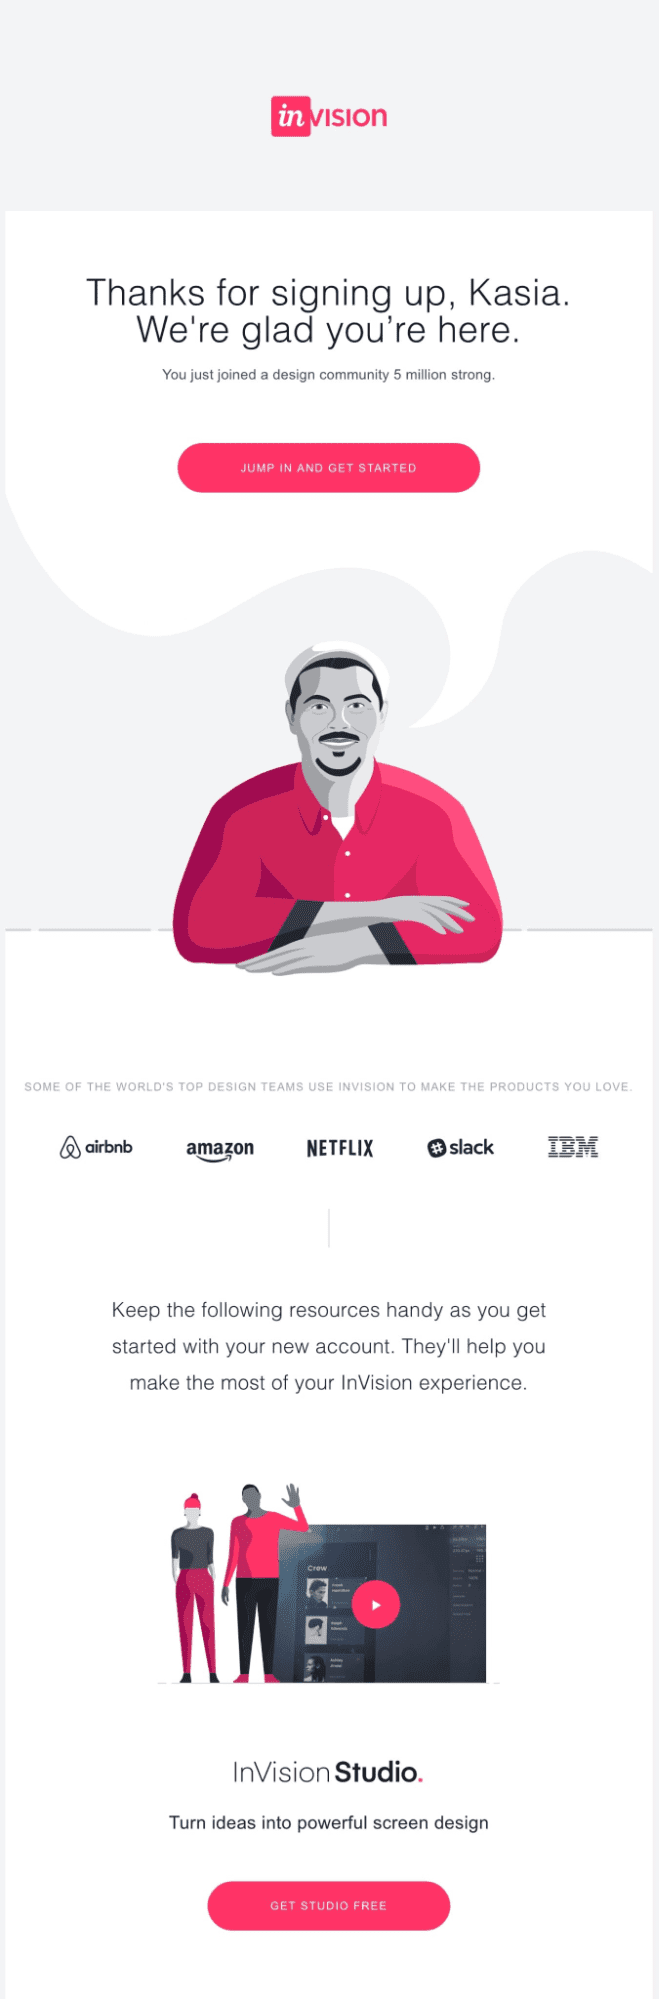 Invision's welcome emails